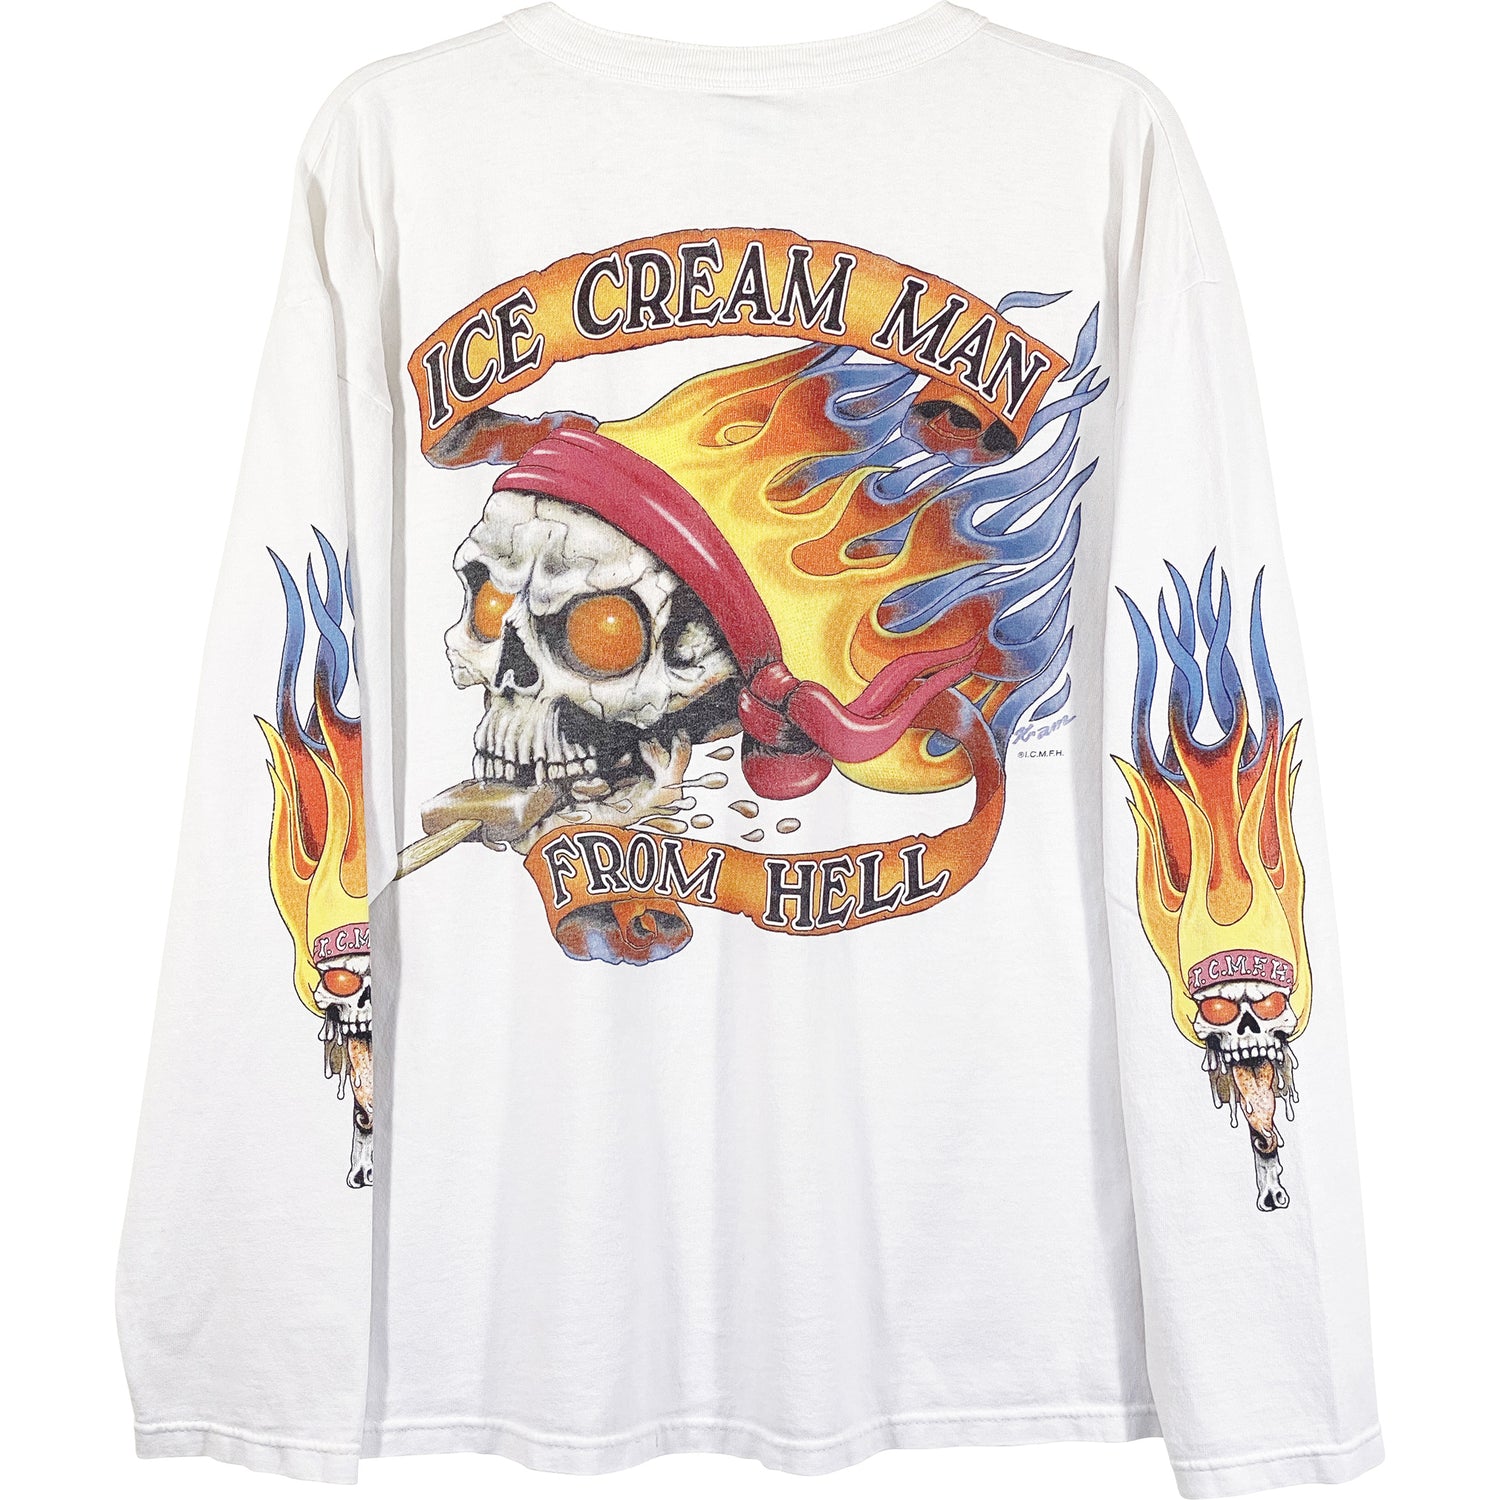 VINTAGE ICE CREAM MAN FROM HELL HENLEY